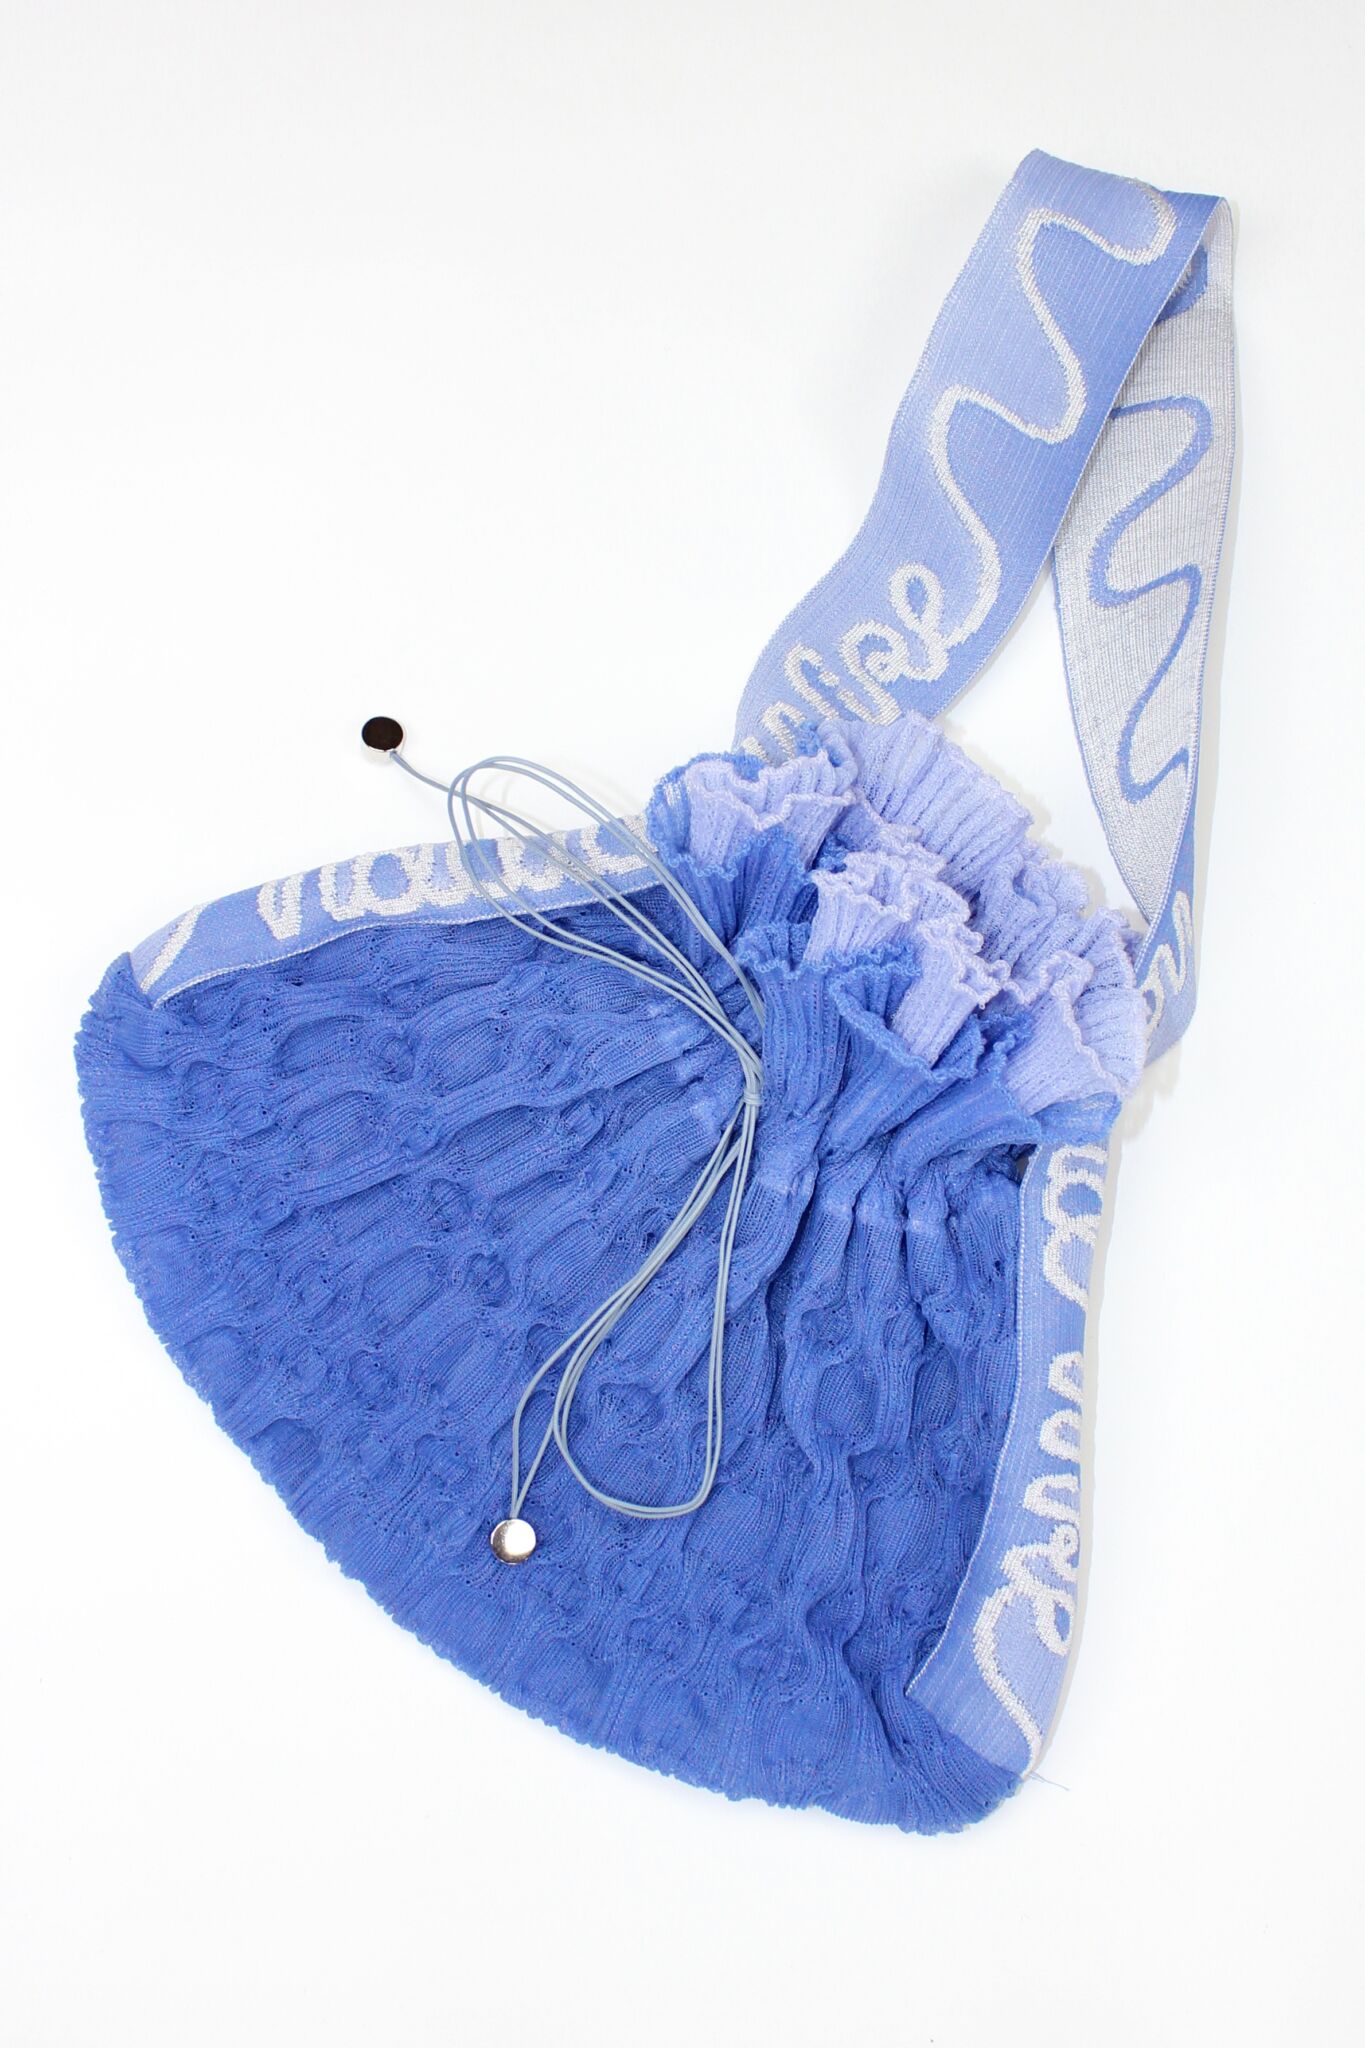 Bubble Frill Bag in powder blue, knitted transparent cinch bag